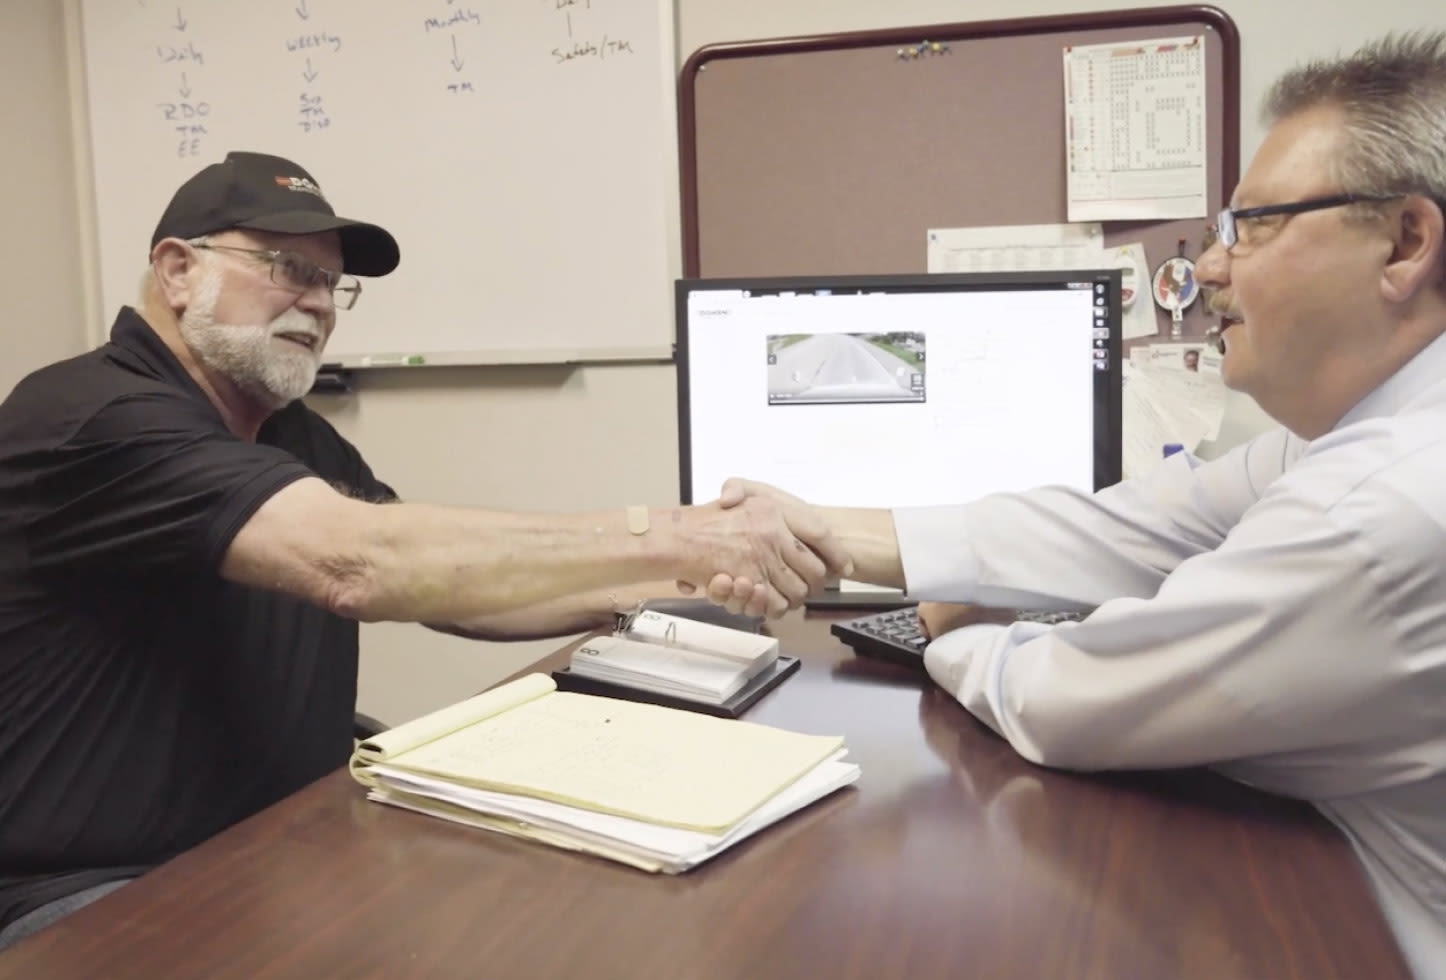 Video thumbnail of two men shaking hands across the table in front of a computer